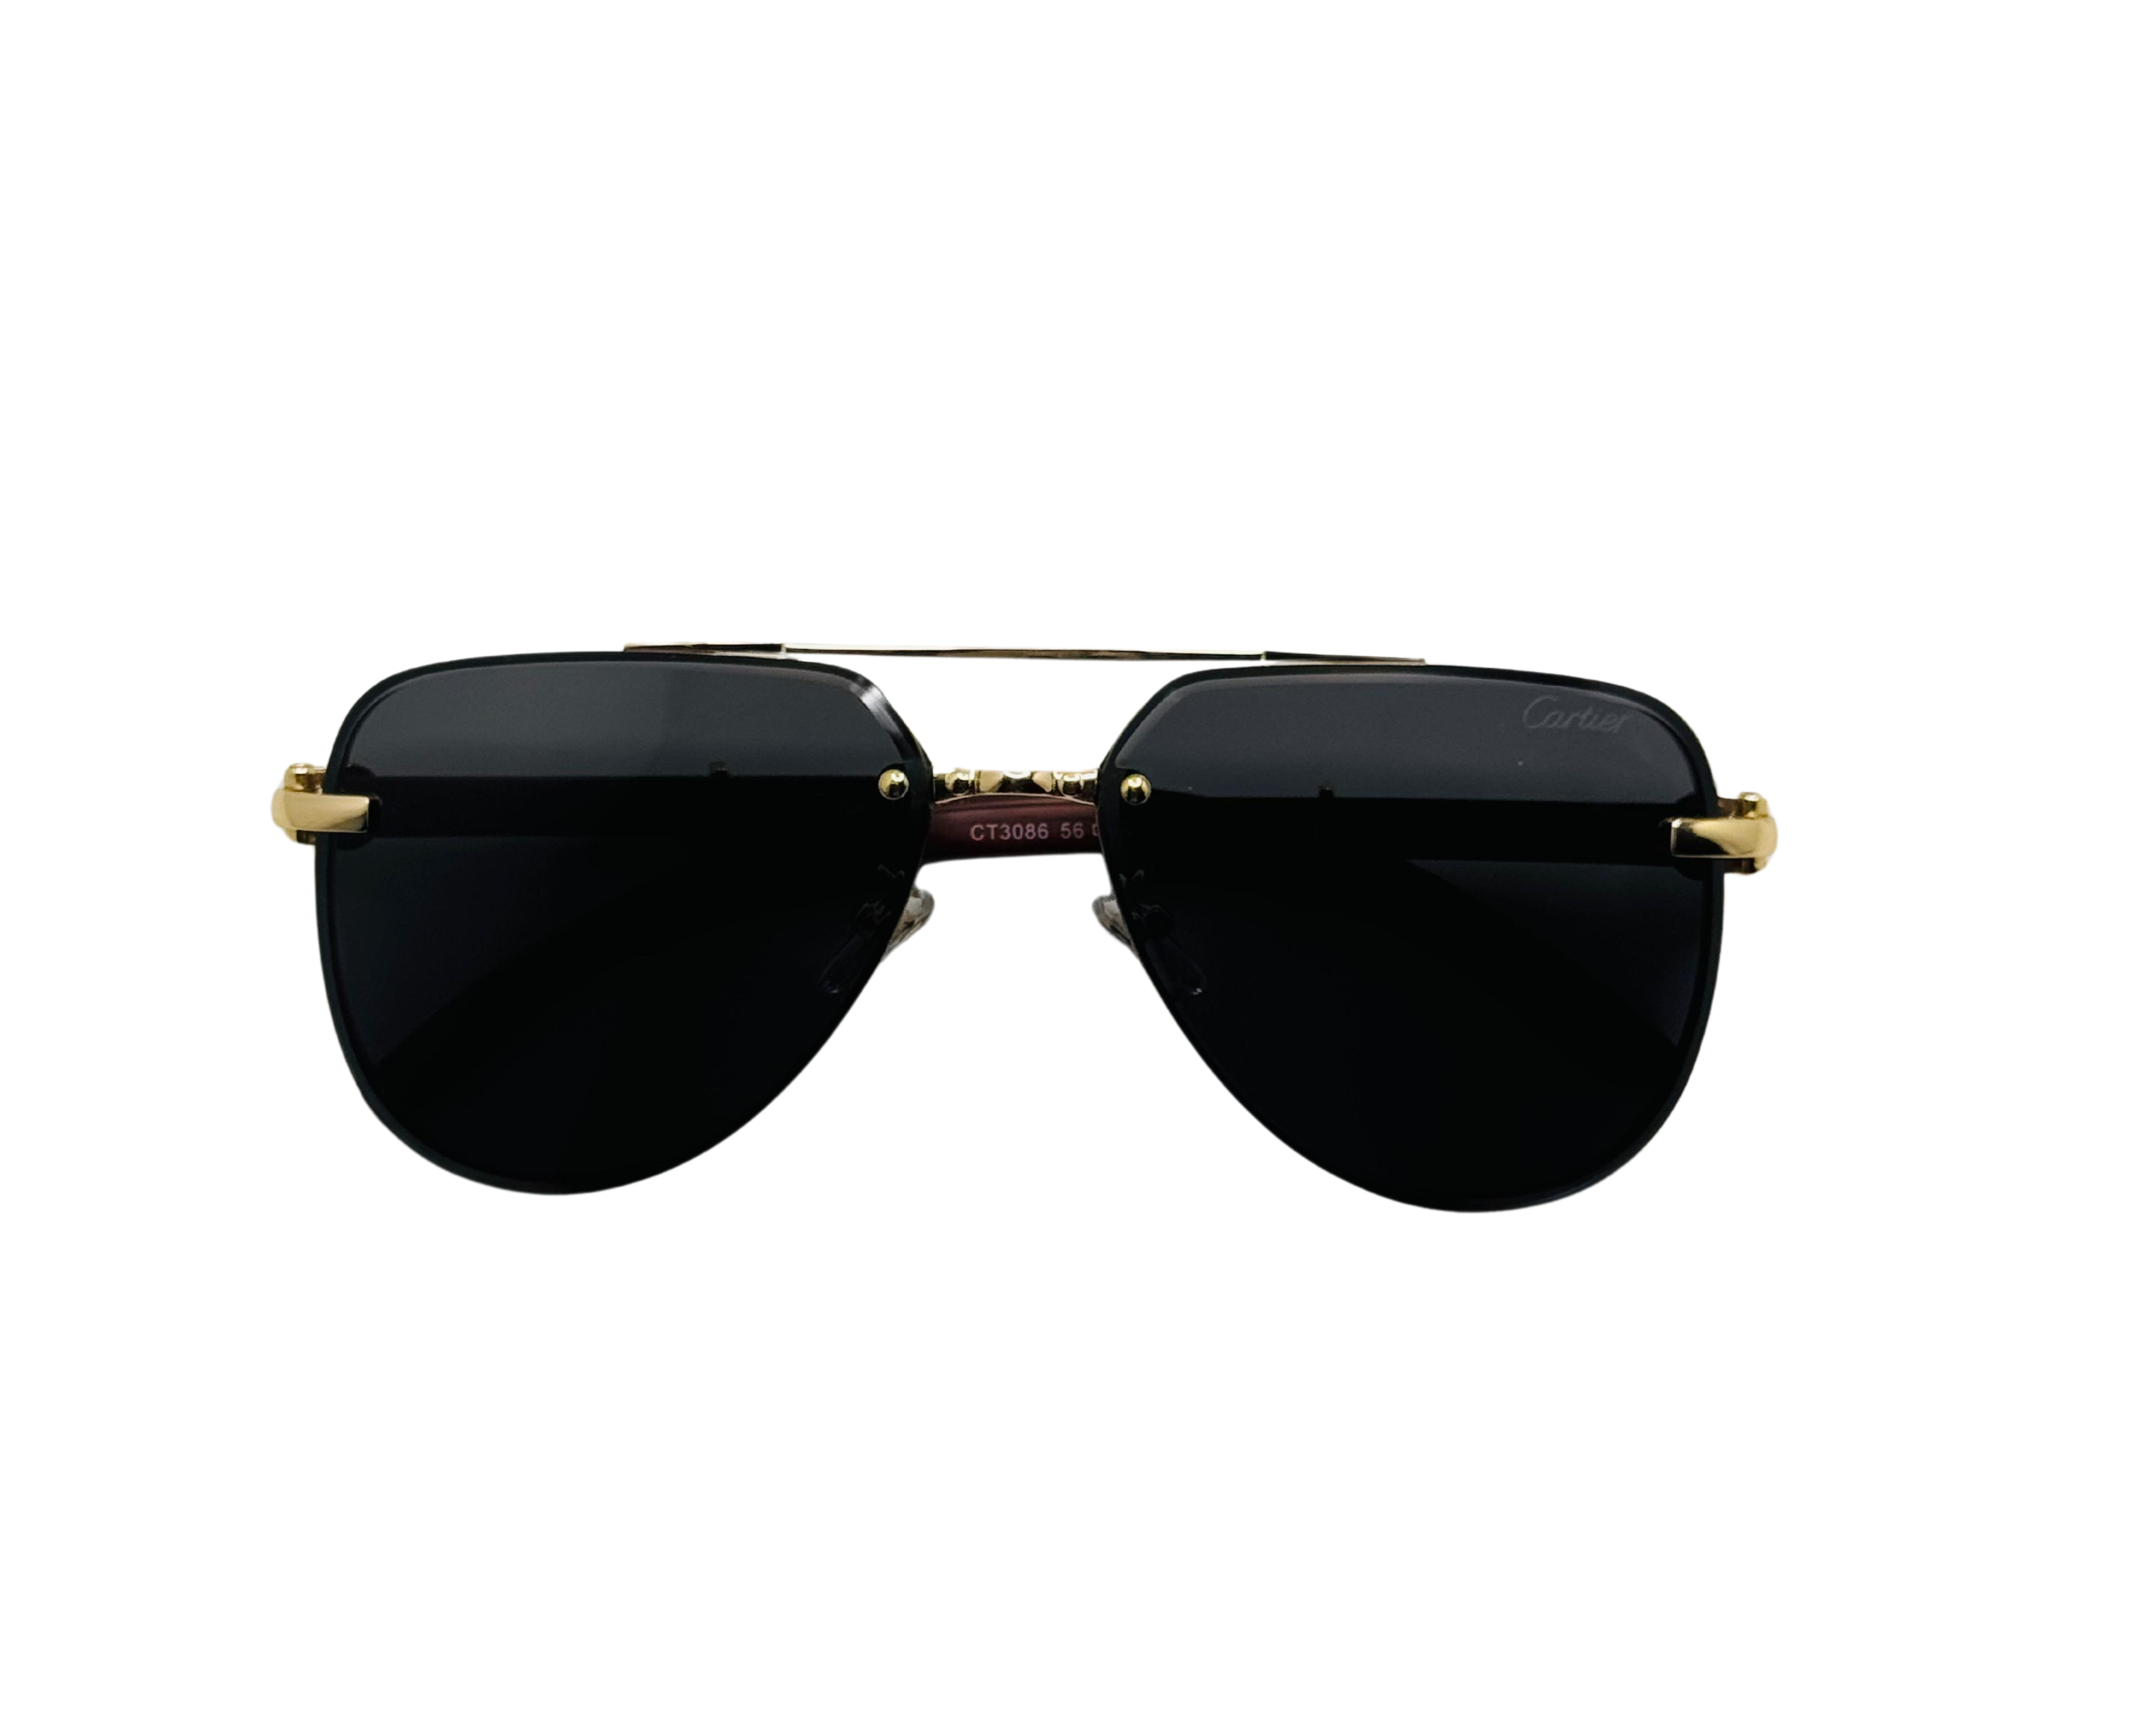 NS Deluxe - 3086 - Rimless - Sunglasses